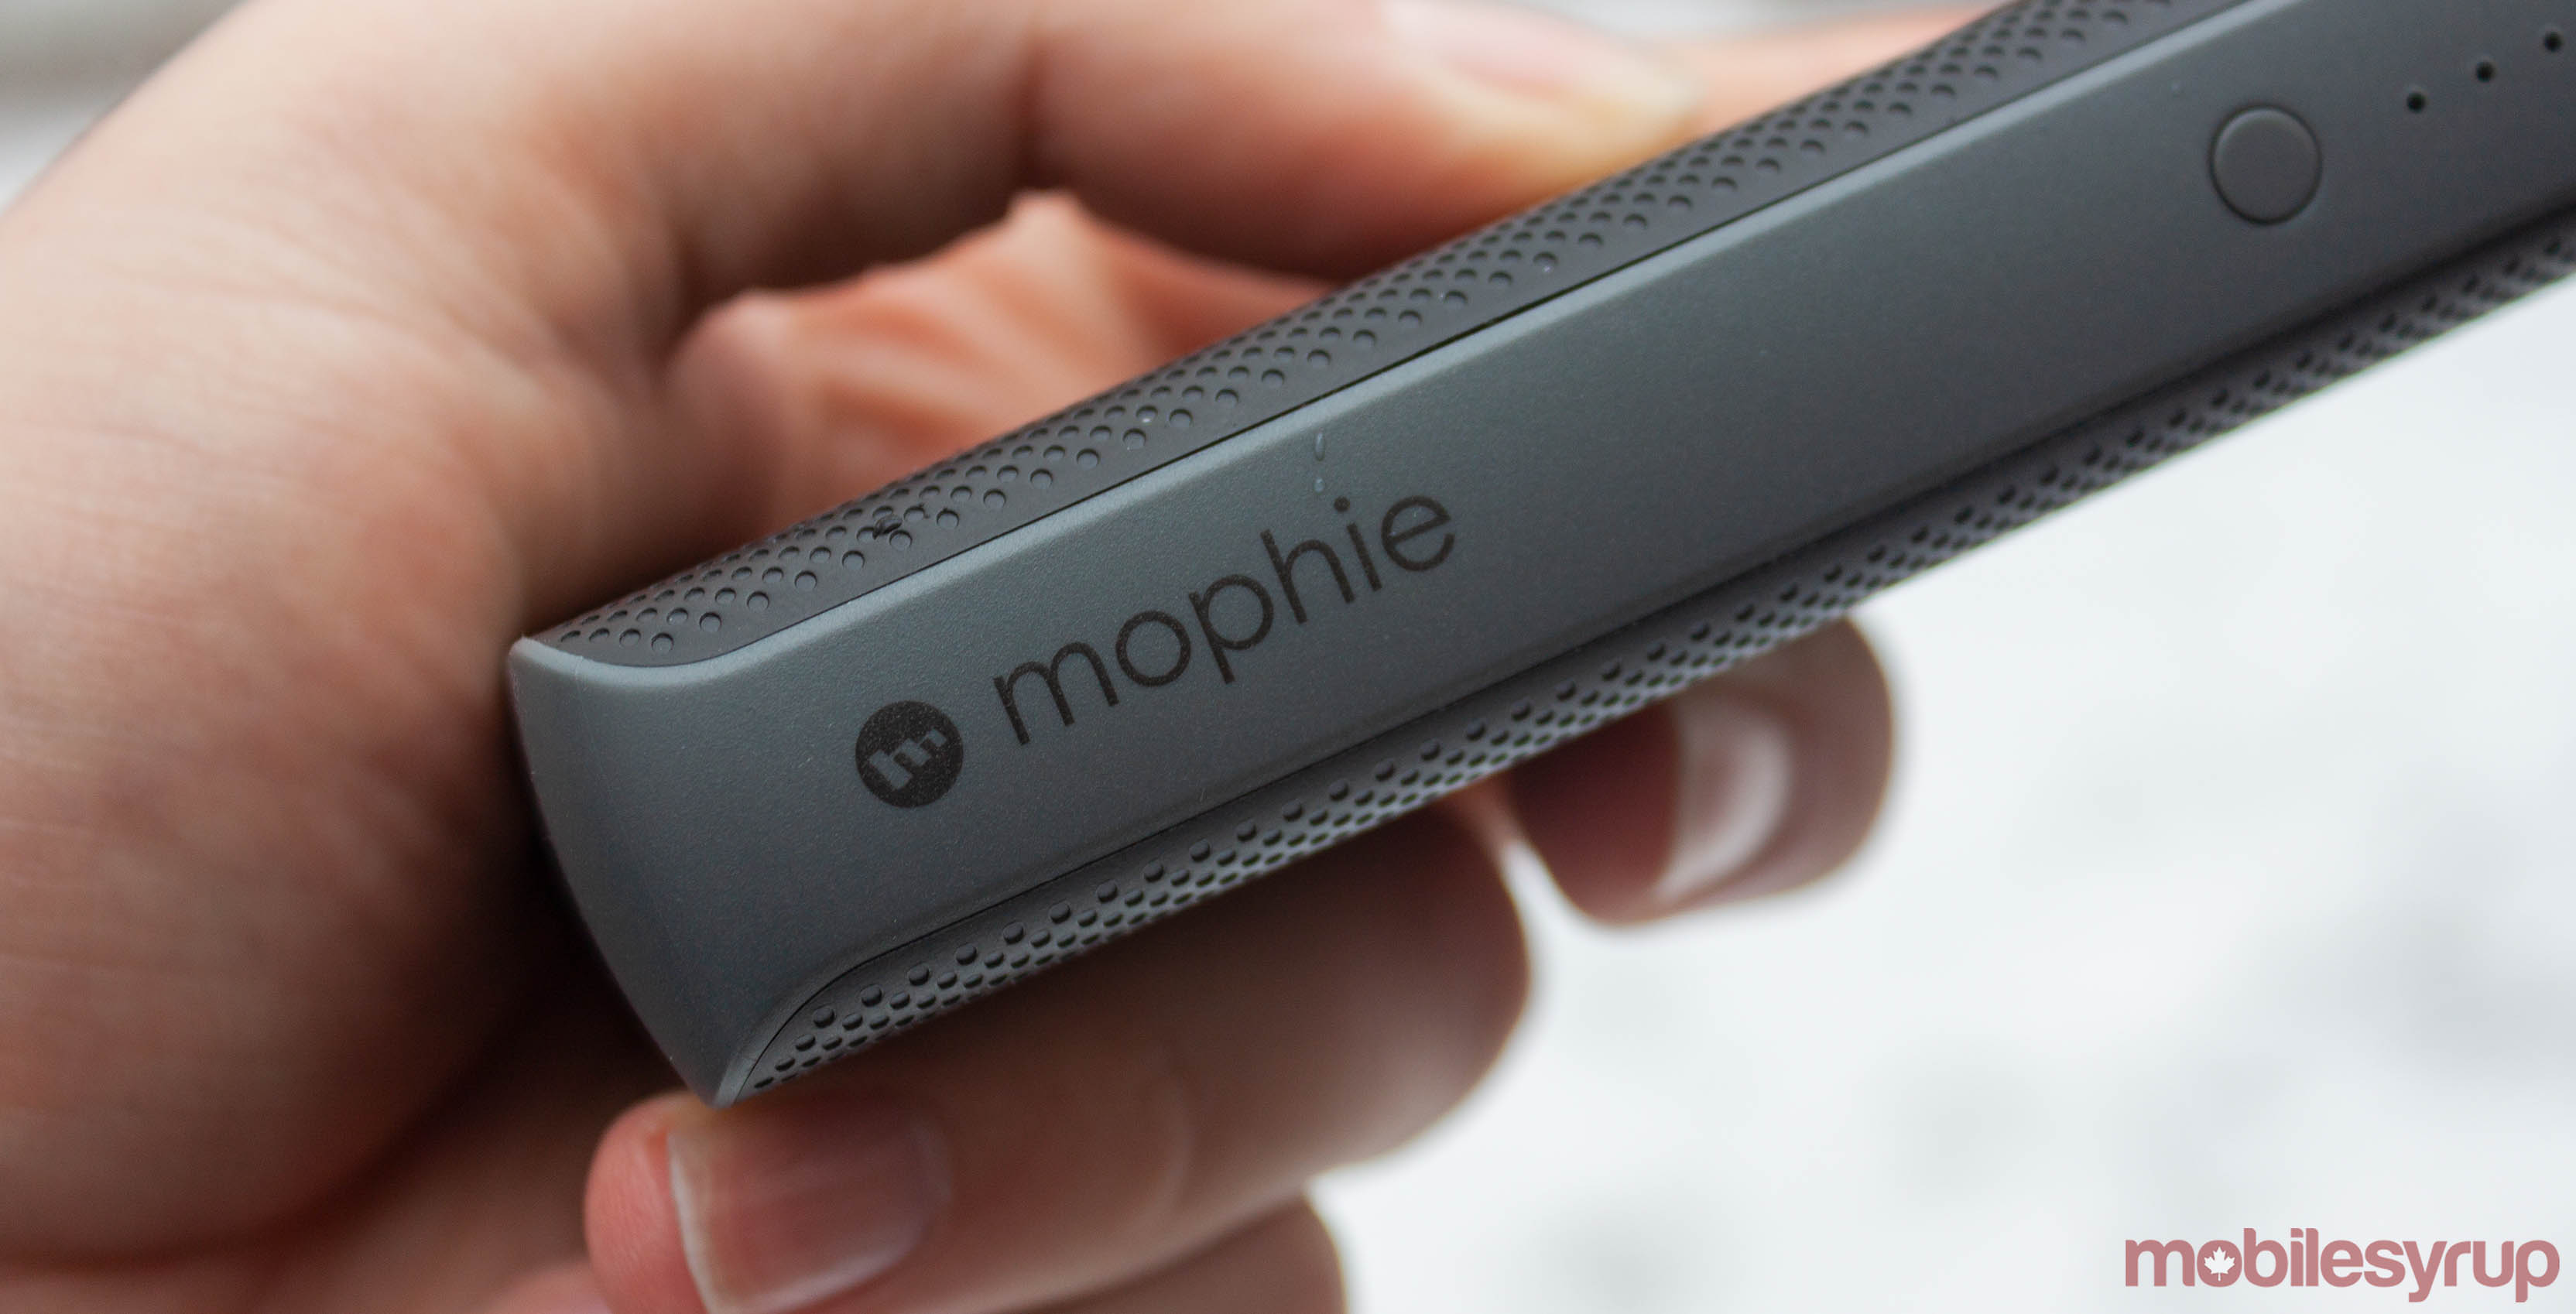 Mophie logo on Powerstation PD XL